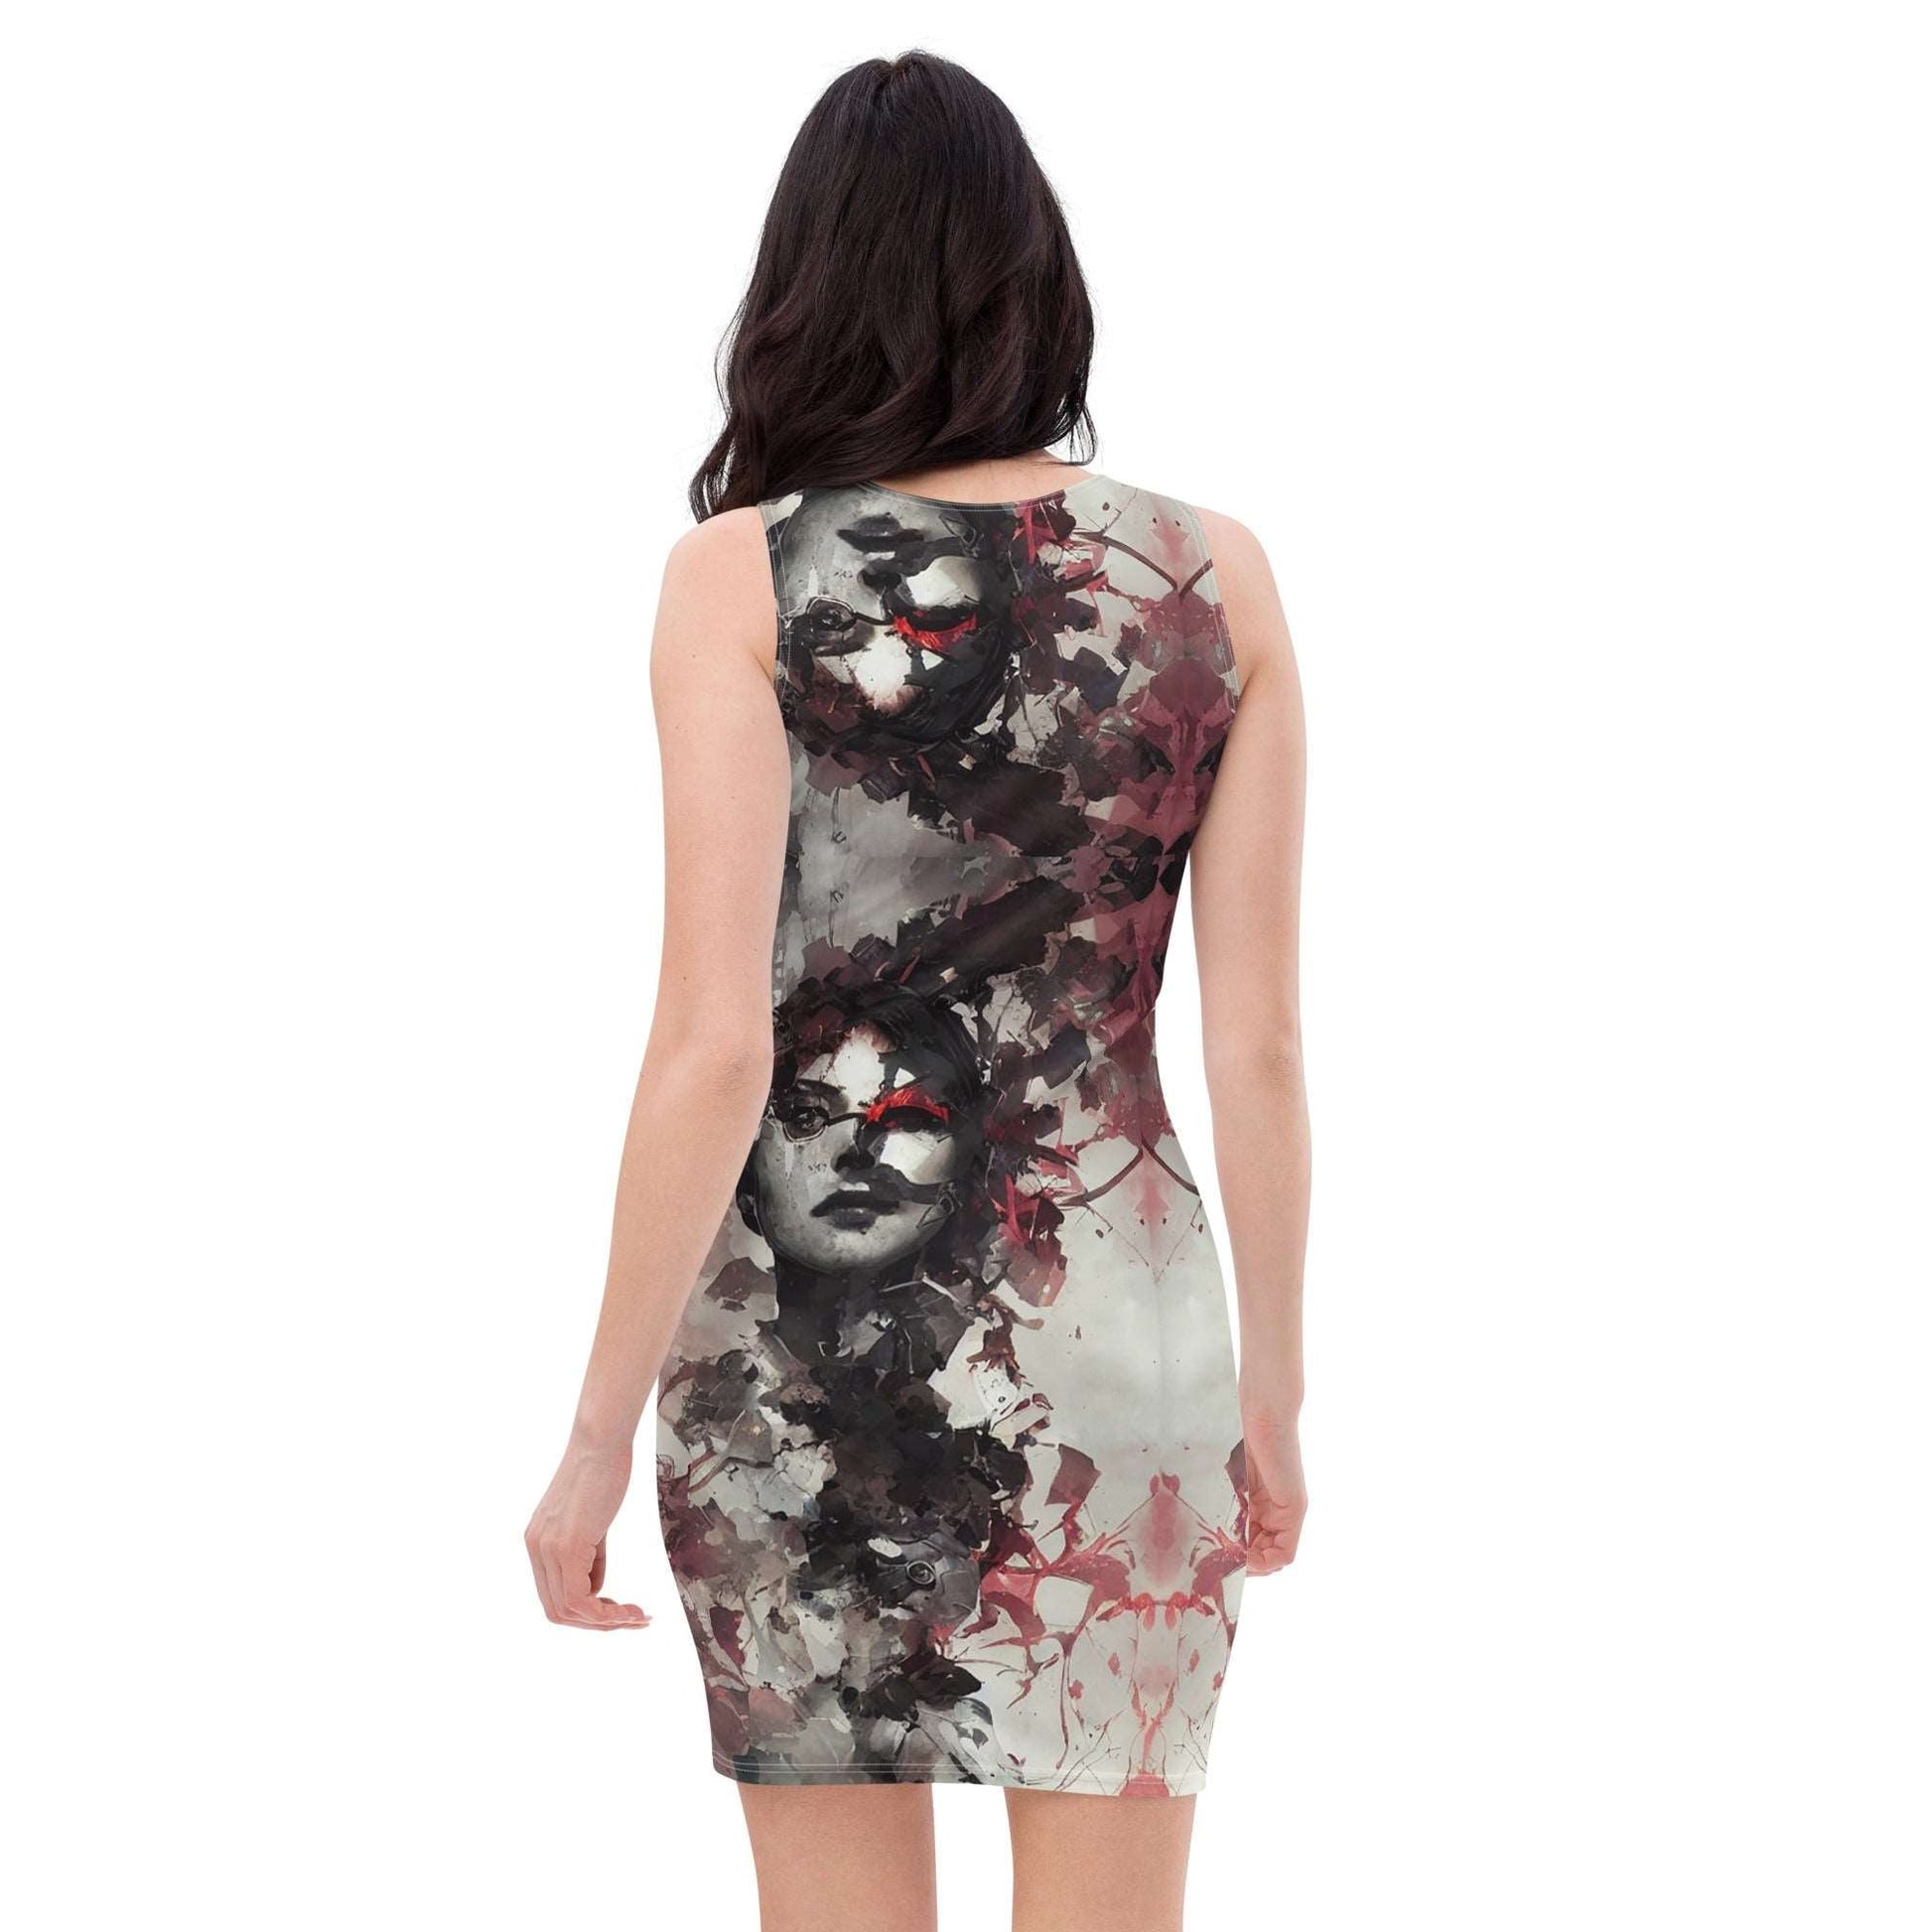 Rachael Bodycon dress - Souled Out World